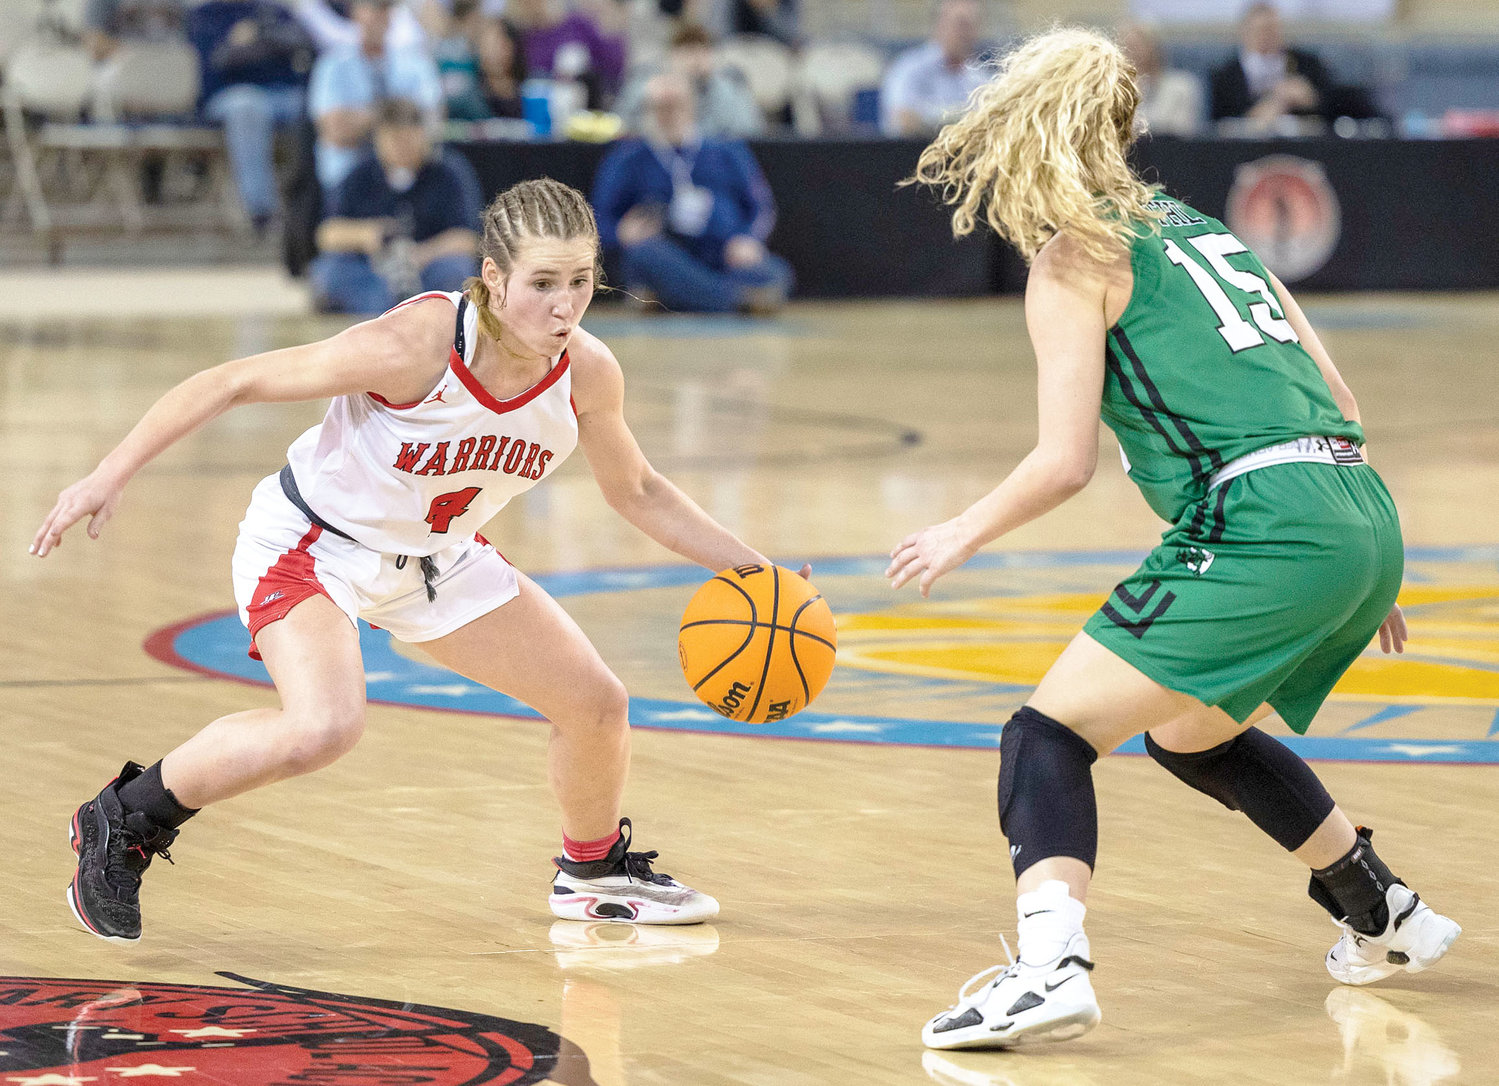 Washington sophomore Rielyn Scheffe puts a move on a defender before driving the ball in during the finals of the State basketball tournament. Jones defeated the Warriors 39-33. Scheffe had a team-high 16 points and was named to the All-Tournament team.